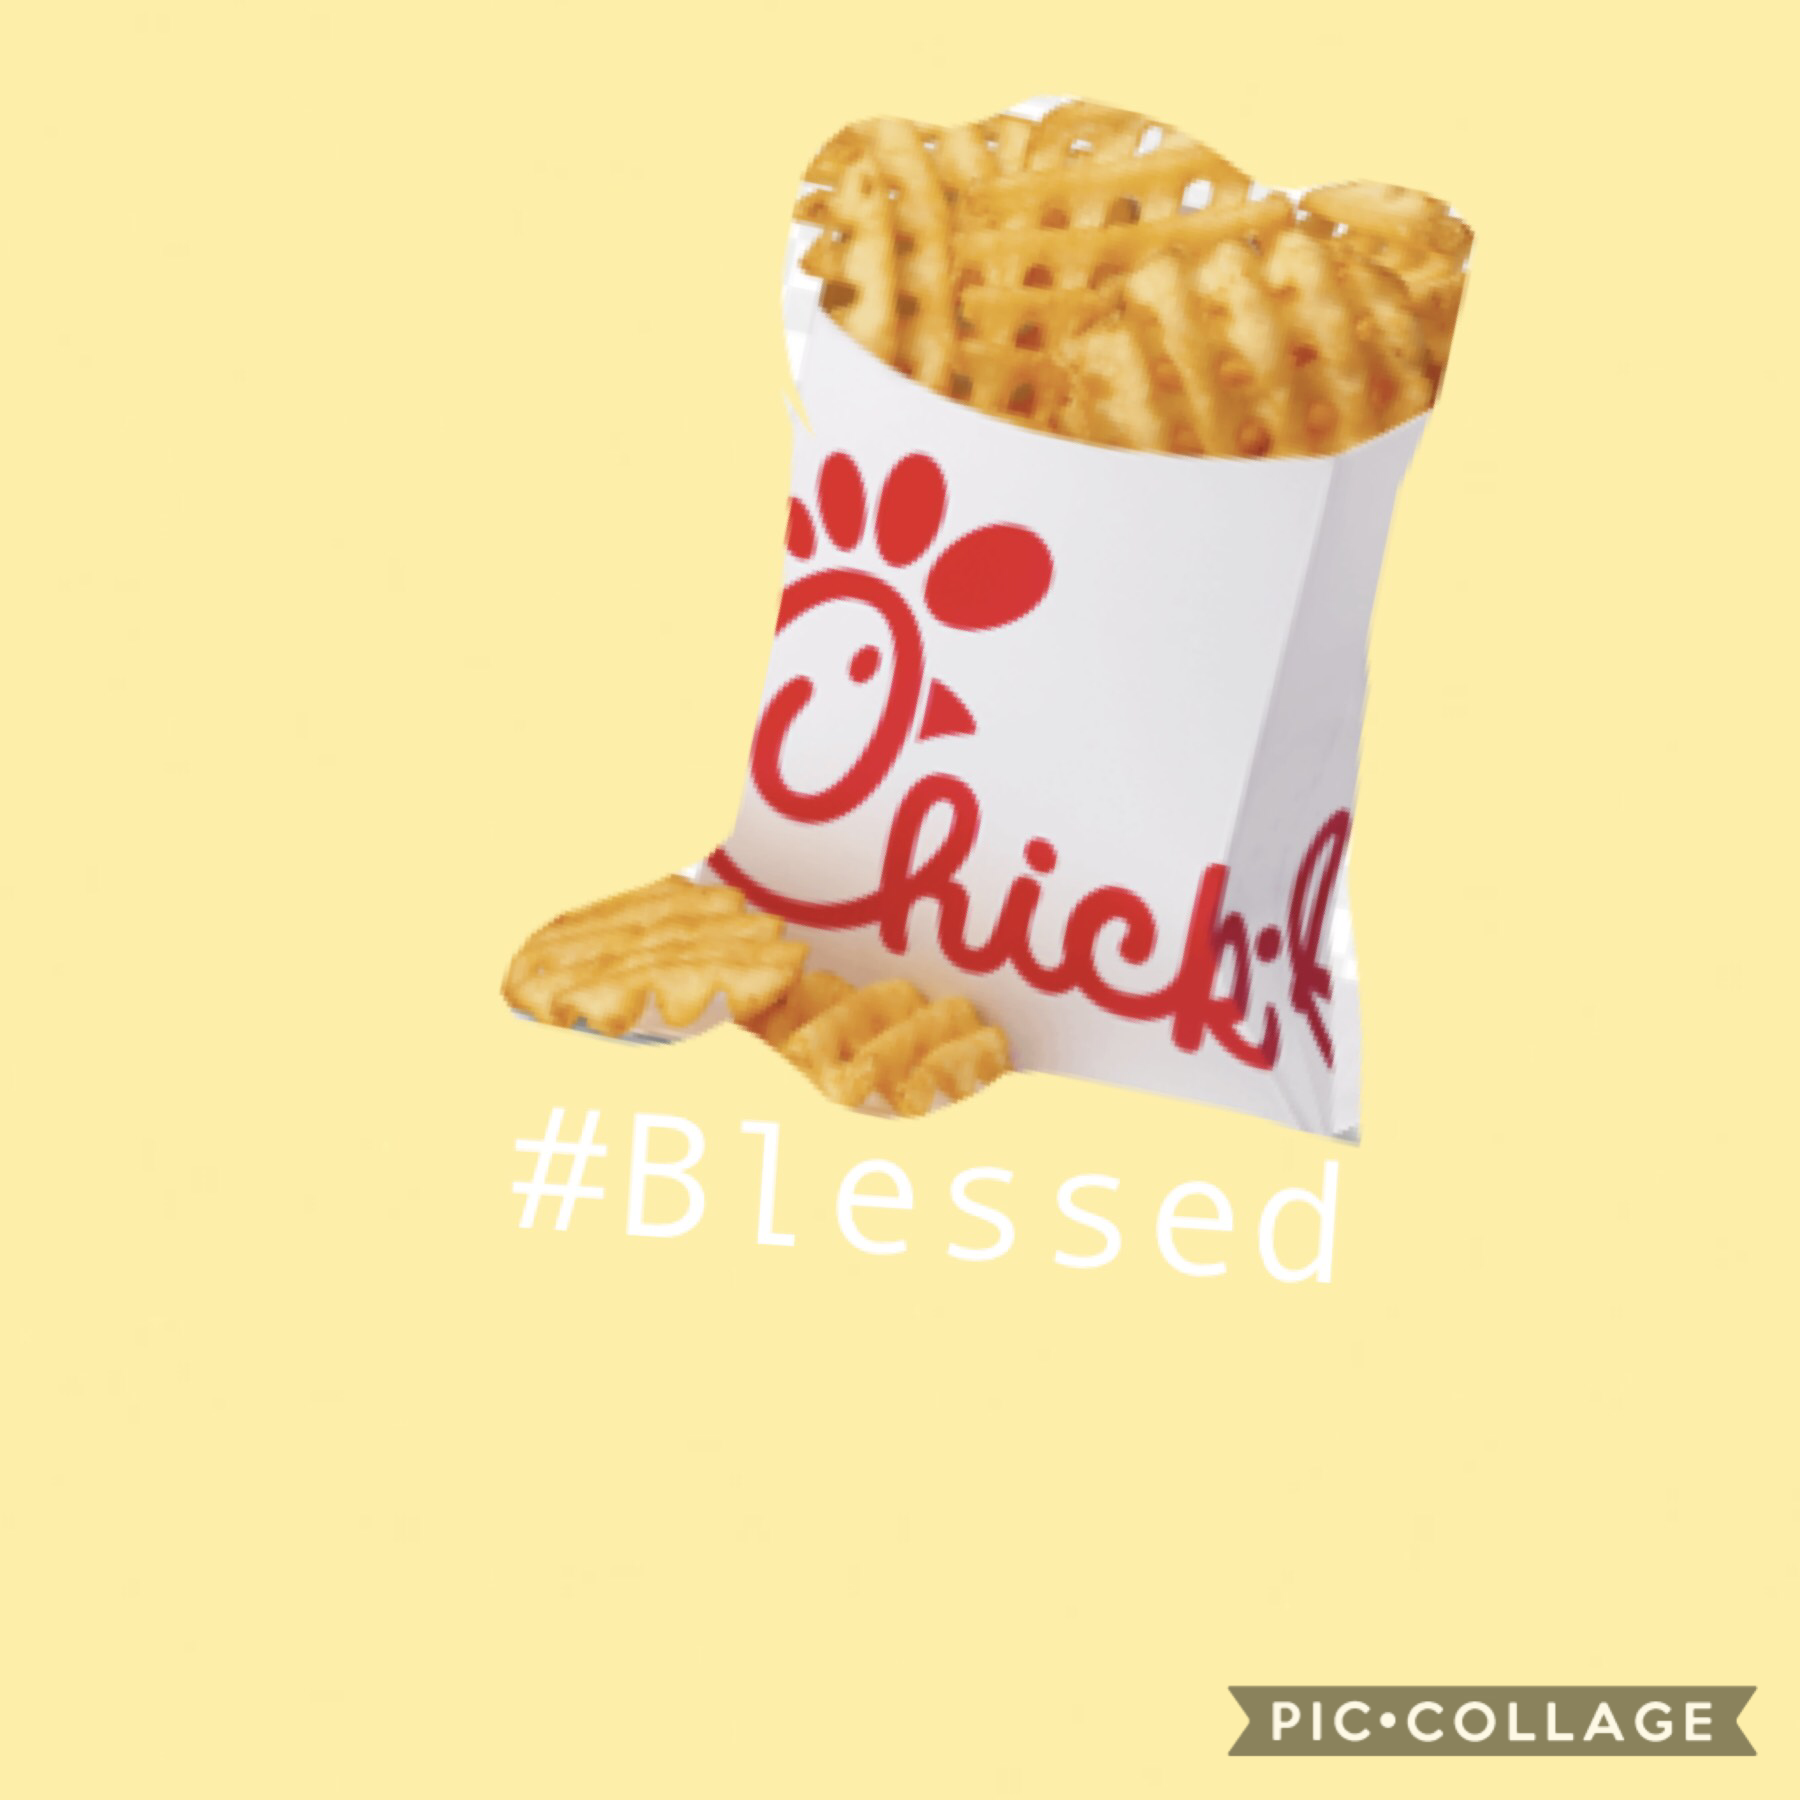 Comment if you love Chick fil a!